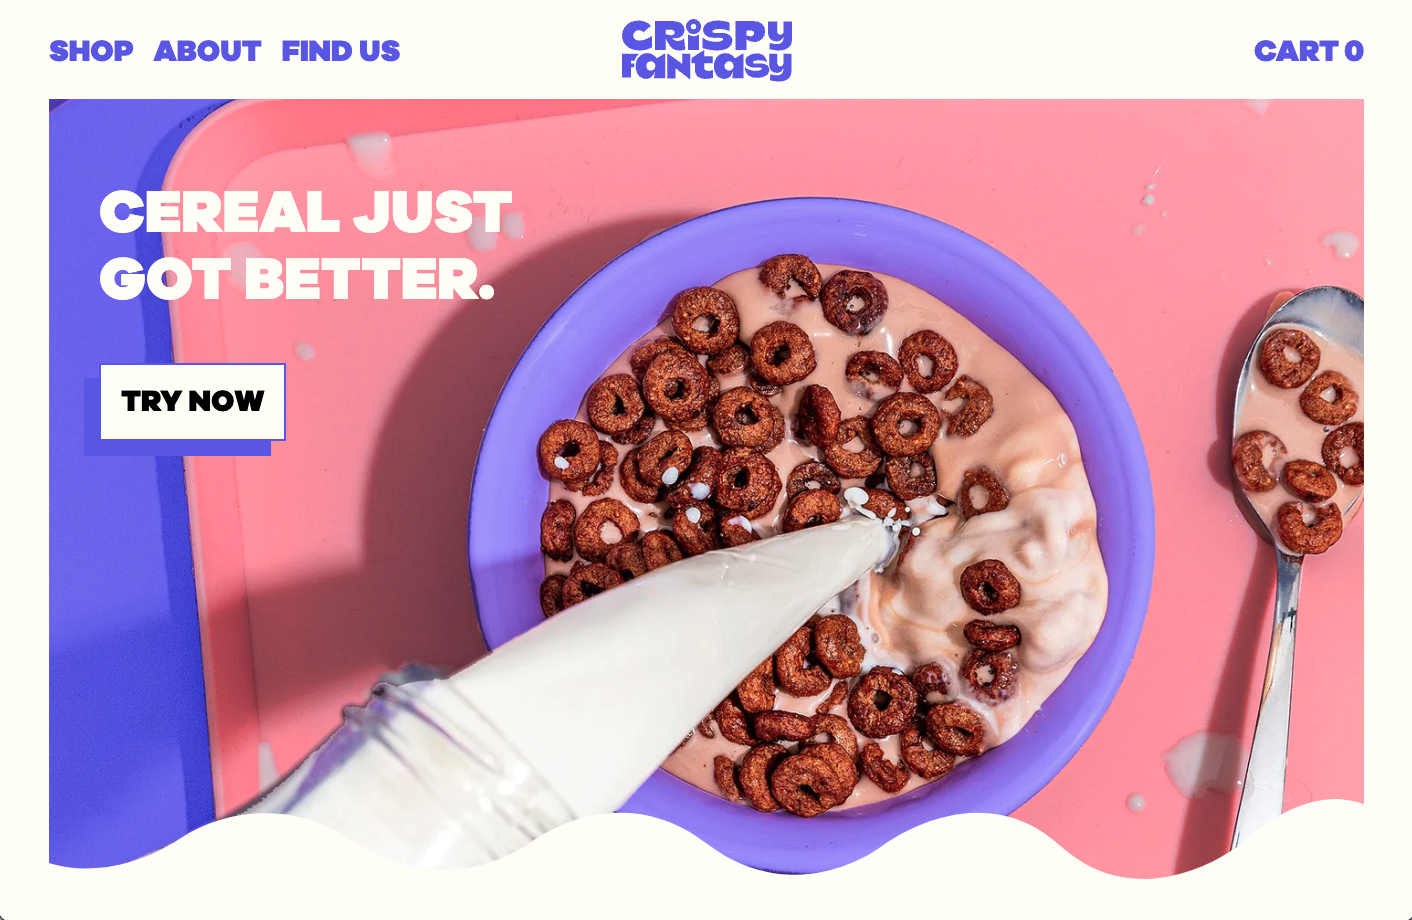 Pink background with a purple bowl of small chocolate hoop-shaped cereal with milk being poured into the bowl.